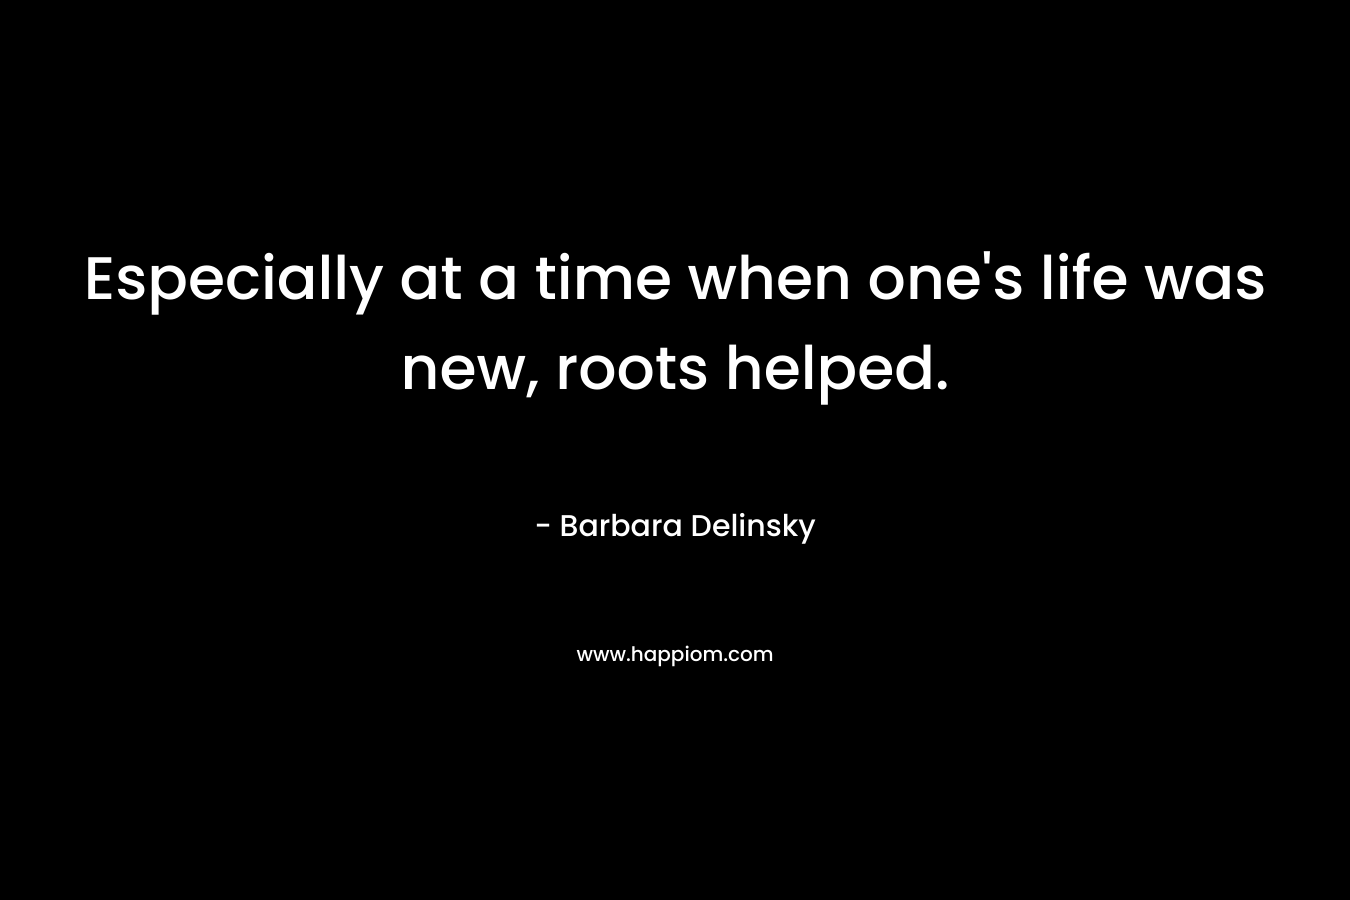 Especially at a time when one's life was new, roots helped.